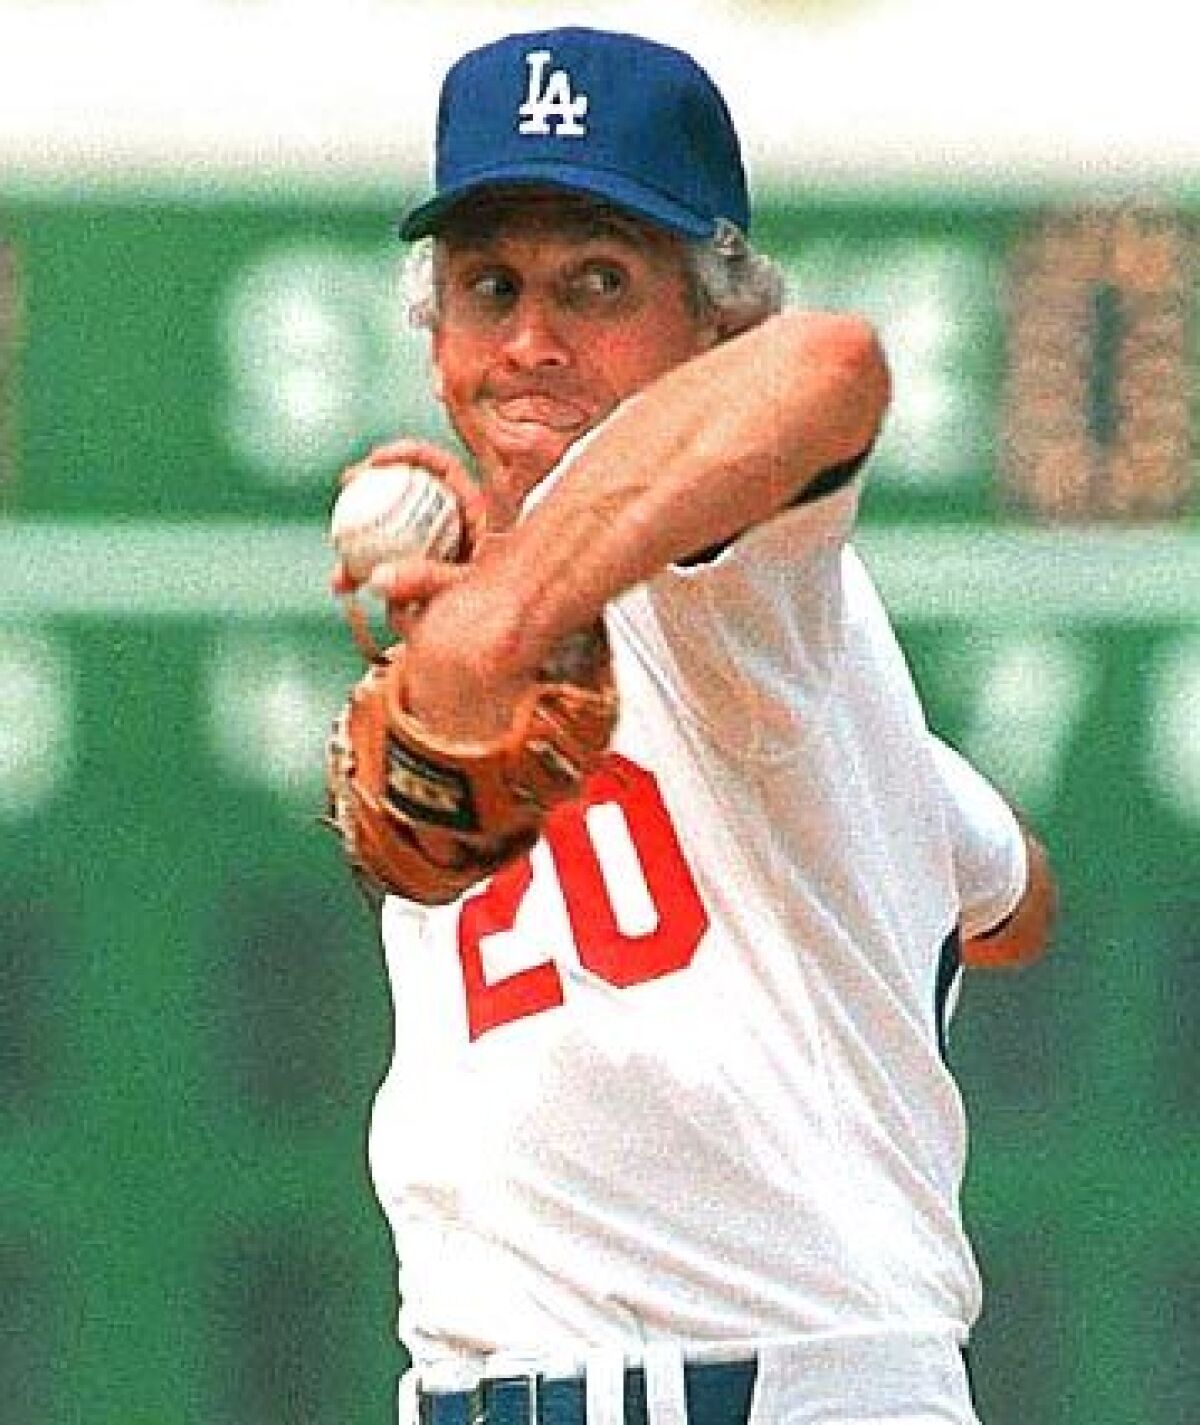 Don Sutton was elected to the baseball Hall of Fame in 1998.